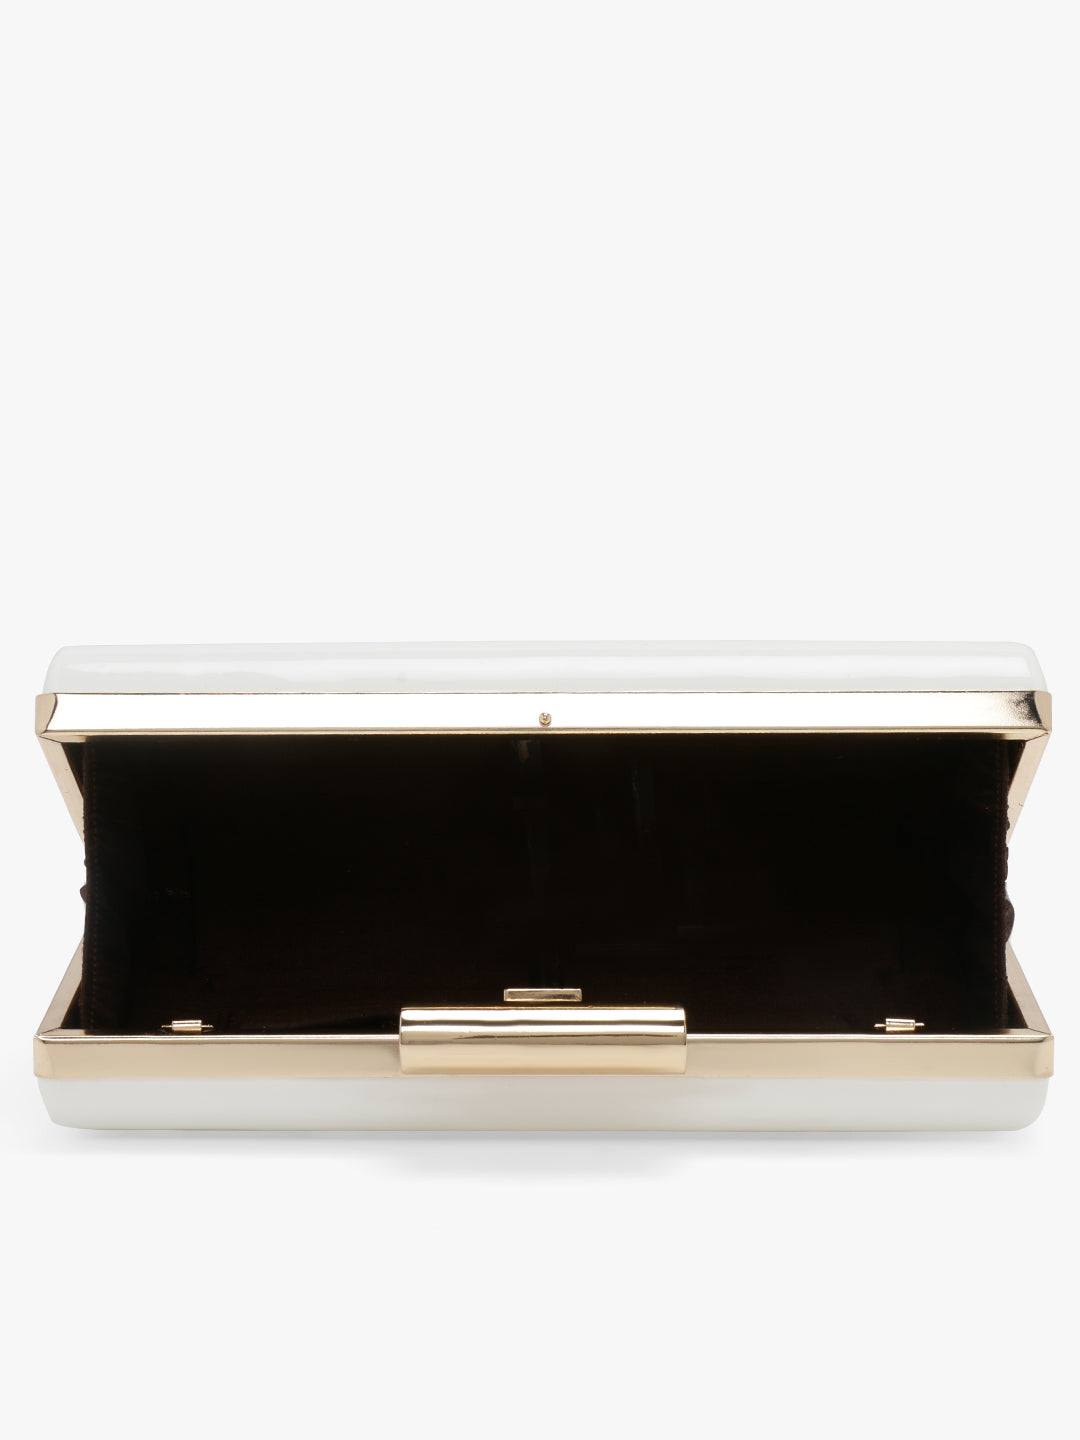 This luxurious accessory offers ample room to carry all your essentials while still exuding elegance and style. 